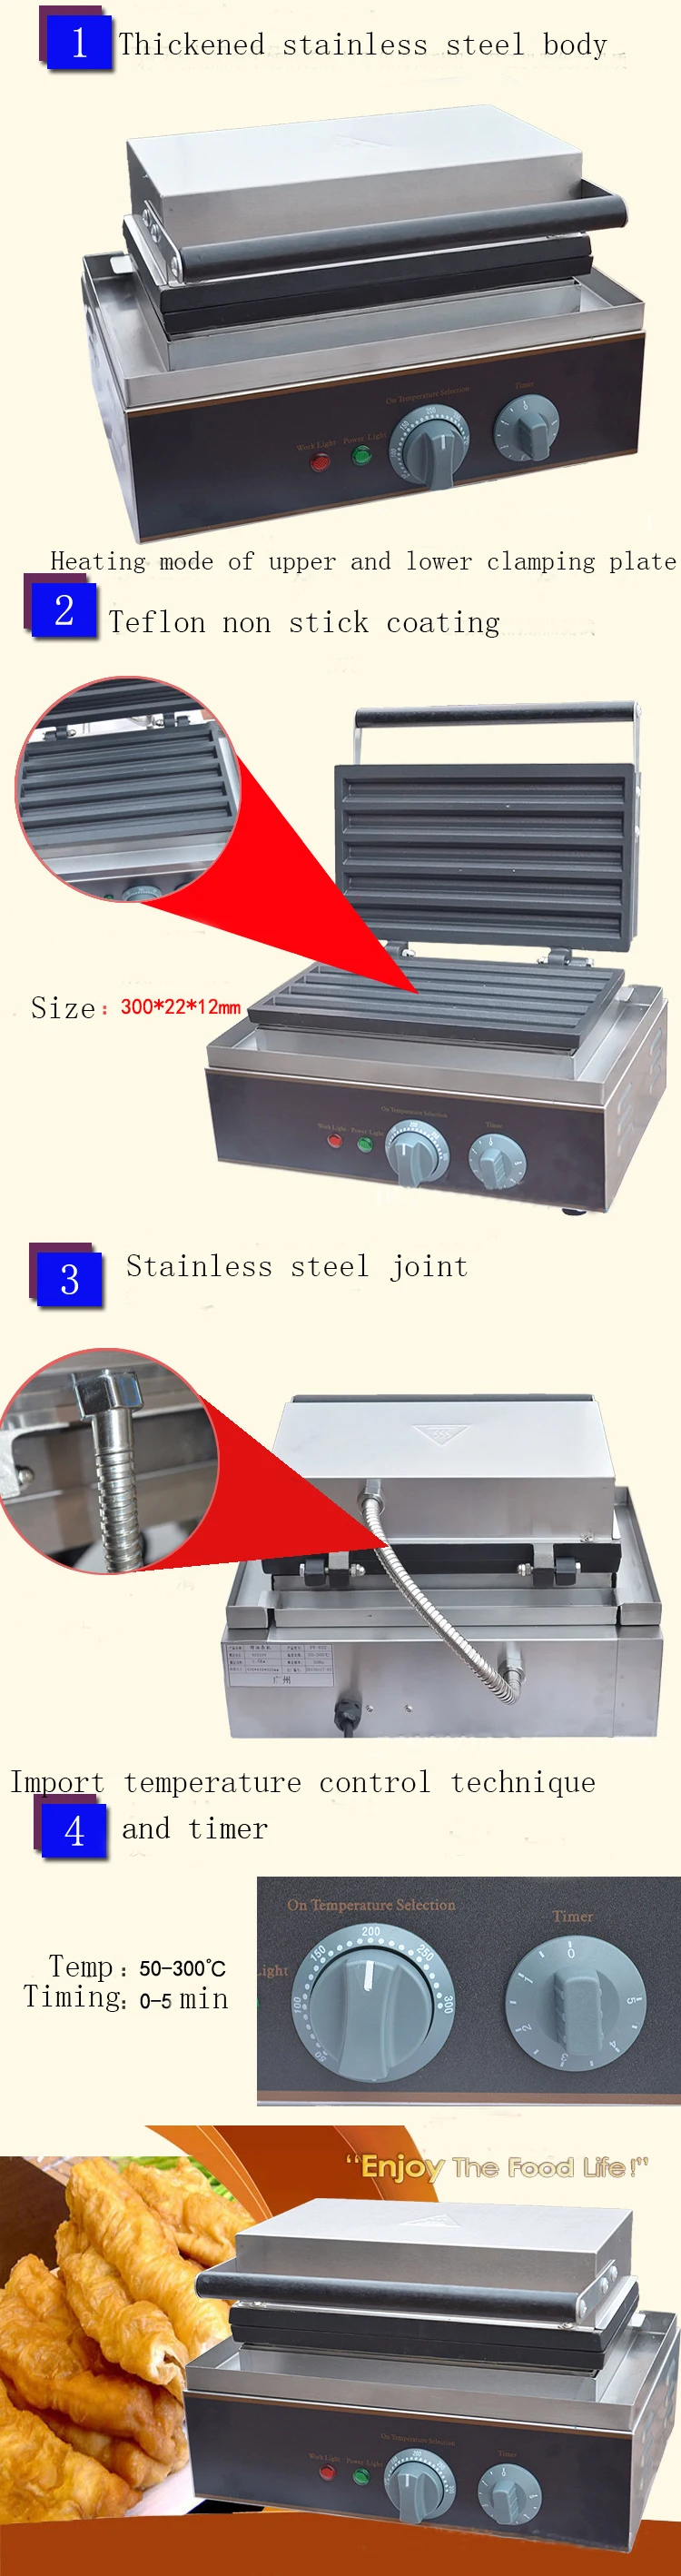 5 Solid Churros Fritters Making Machines Stainless Steel Churros Machine Churros Makers